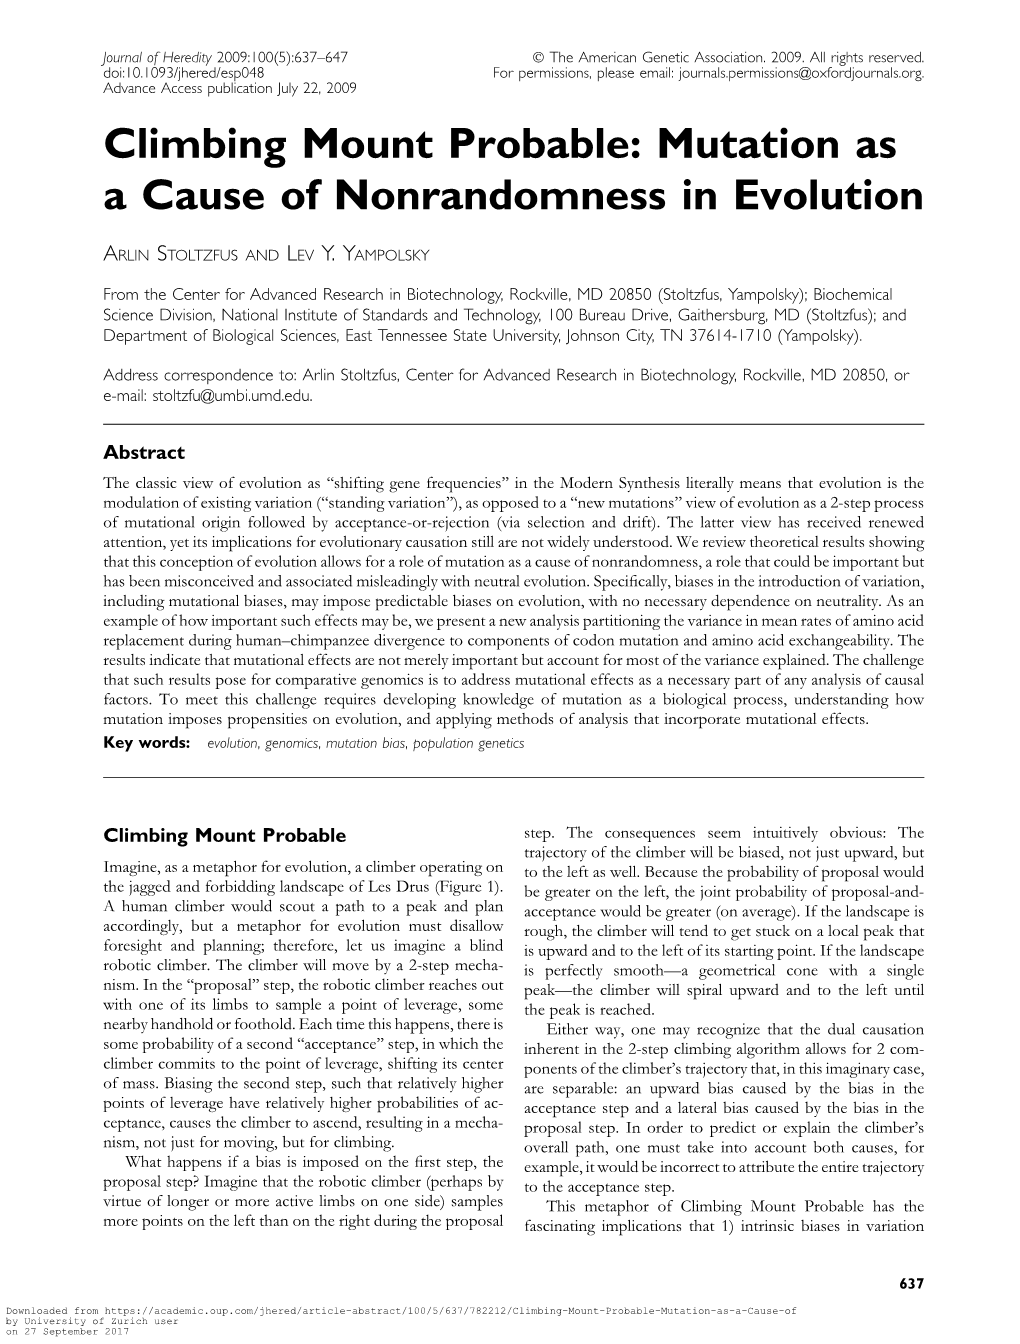 Climbing Mount Probable: Mutation As a Cause of Nonrandomness in Evolution